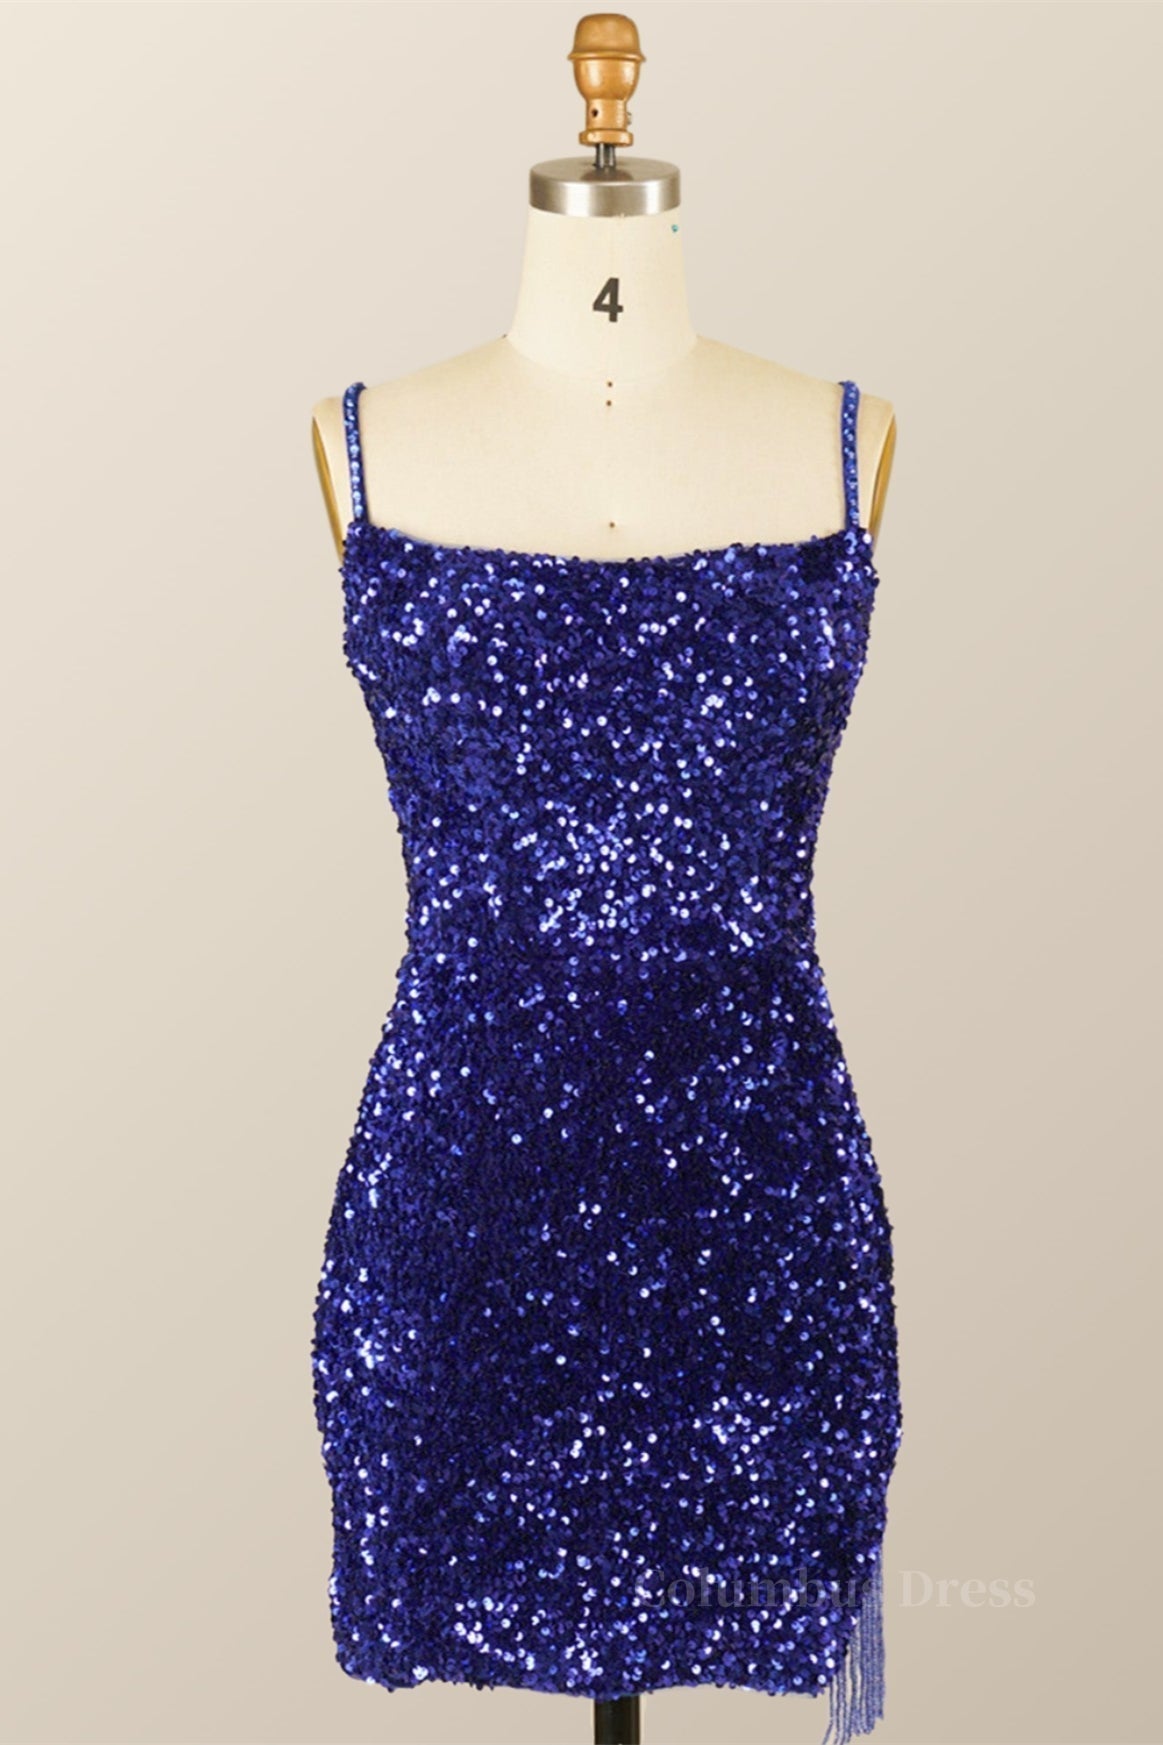 Royal Blue Sequin Tassels Bodycon Mini Dress outfit, Bridesmaid Dress With Lace